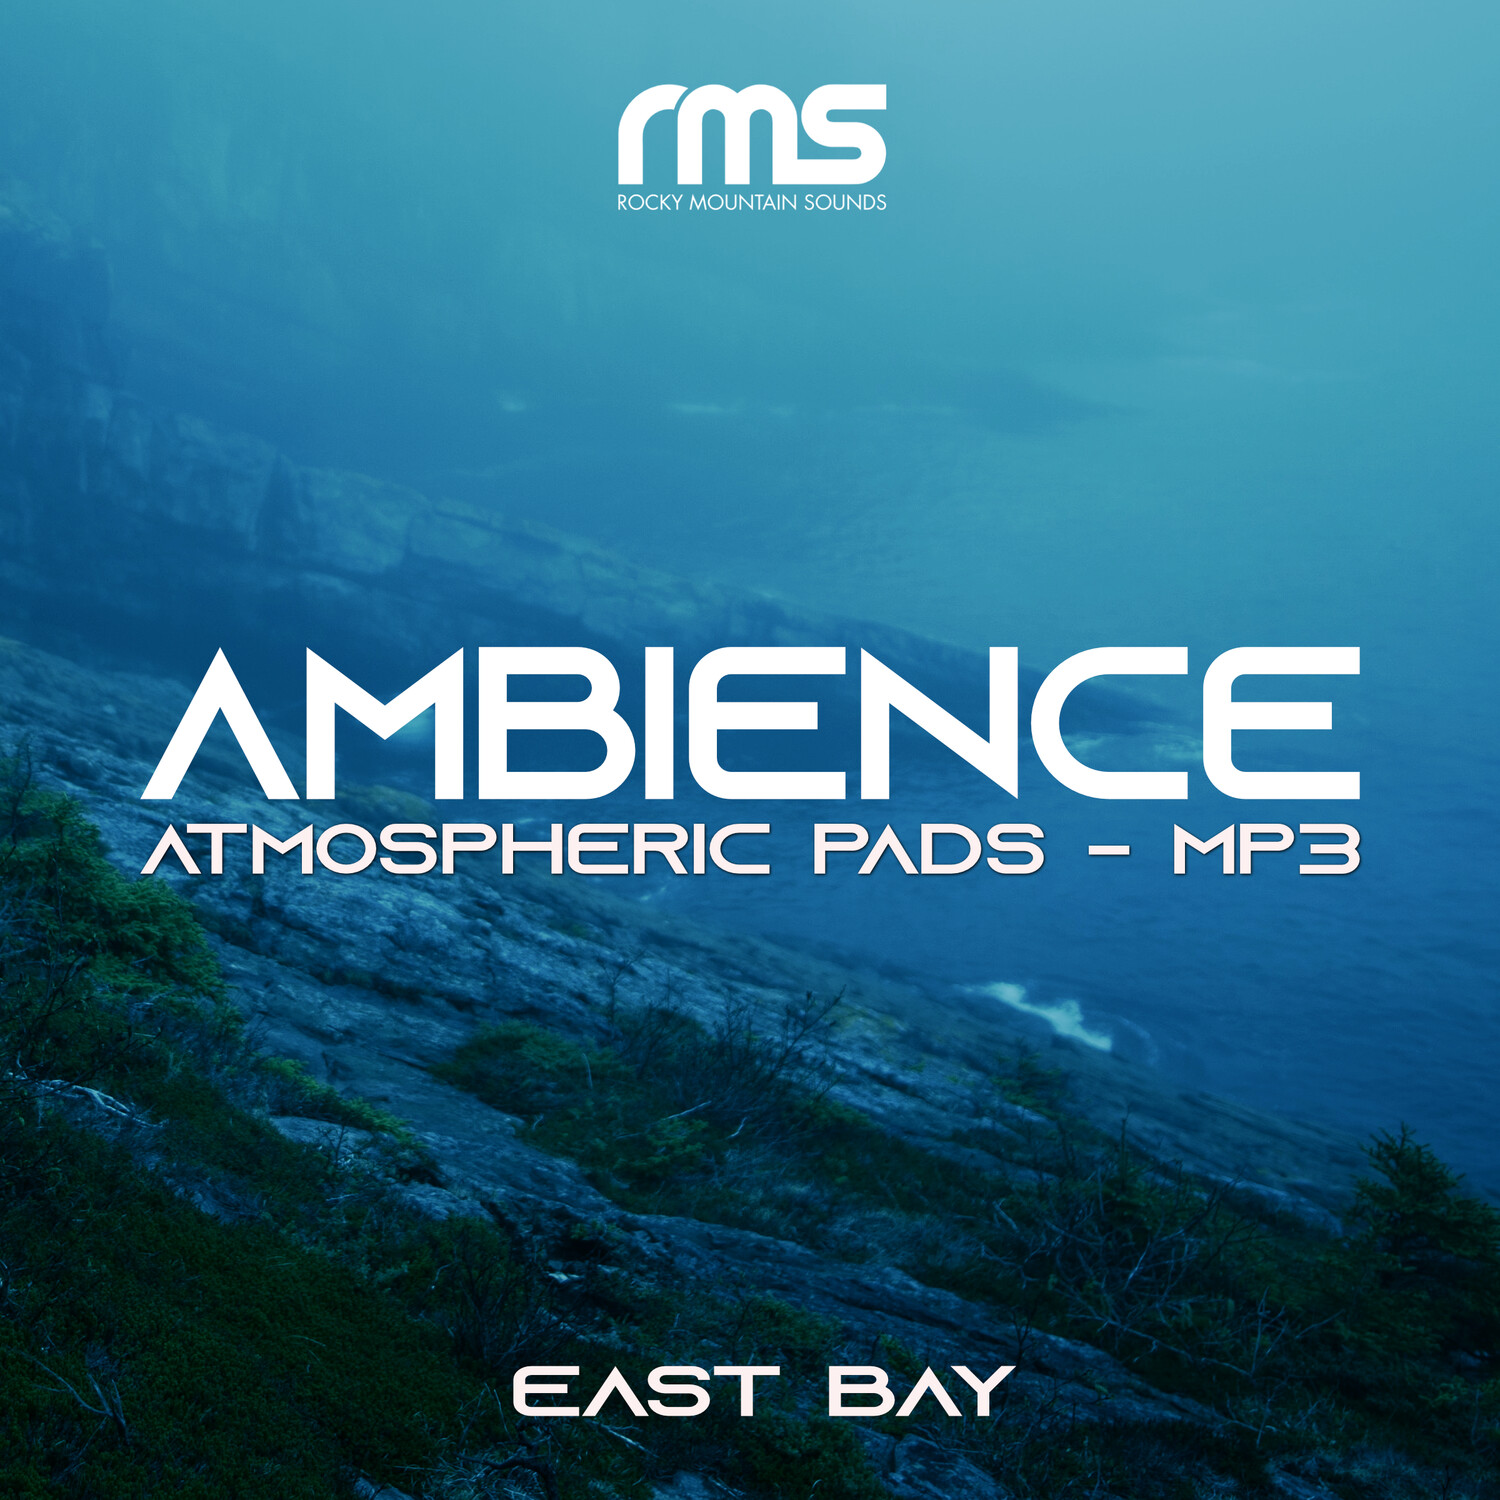 [WSBT] Ambience East Bay Pads